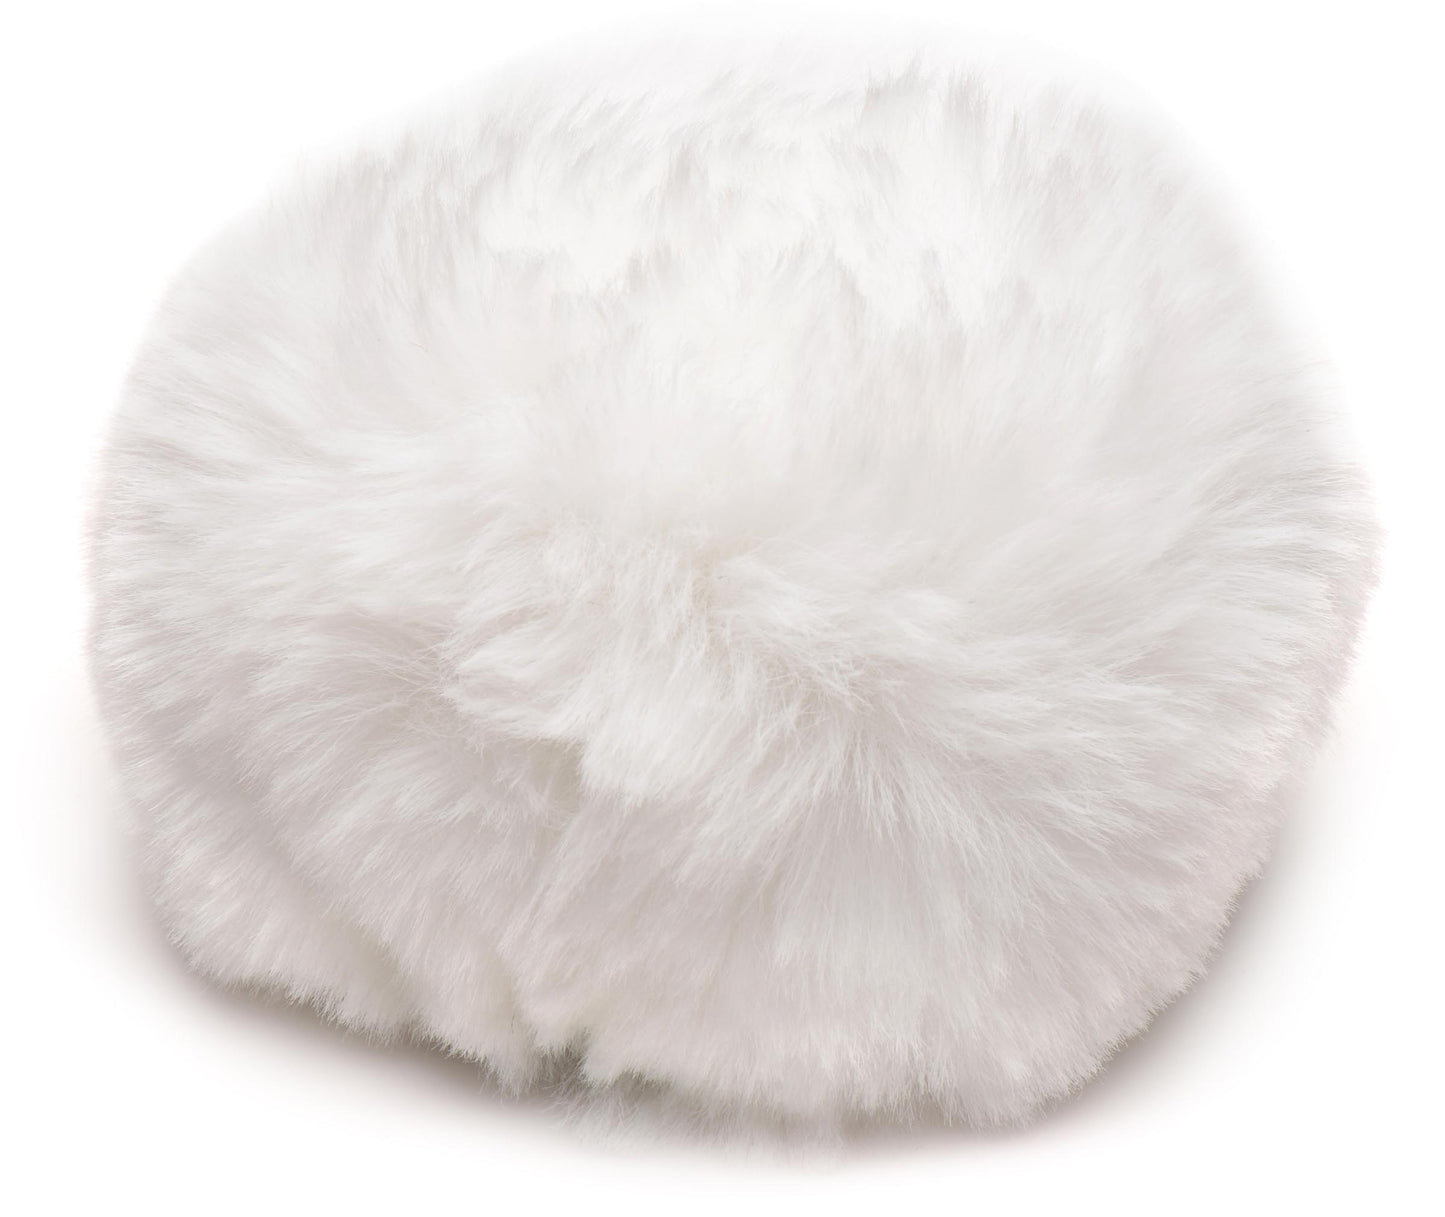 Interchangeable Bunny Tail - White - UABDSM